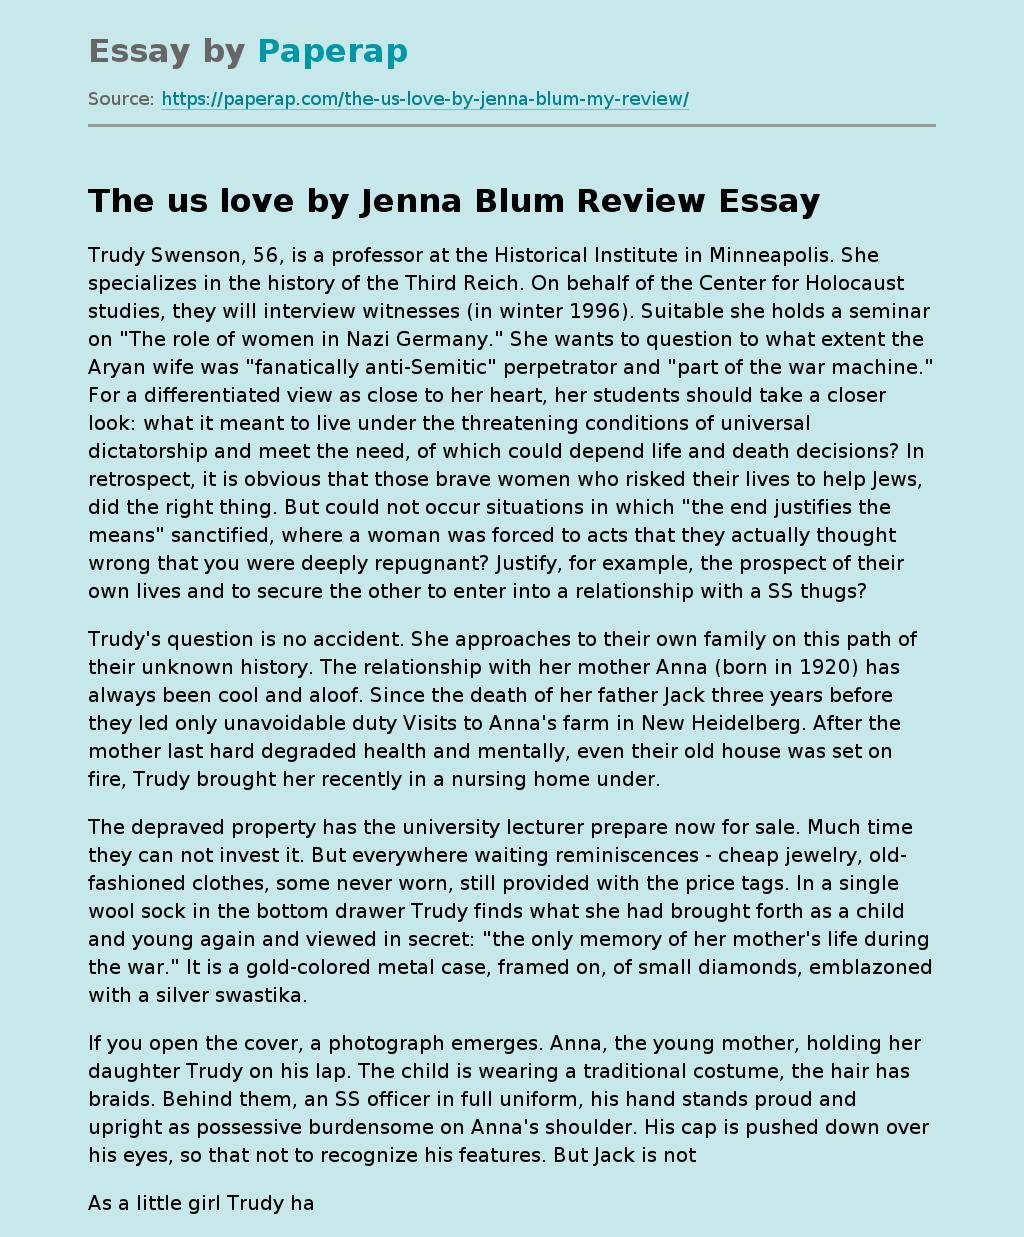 The us love by Jenna Blum Review